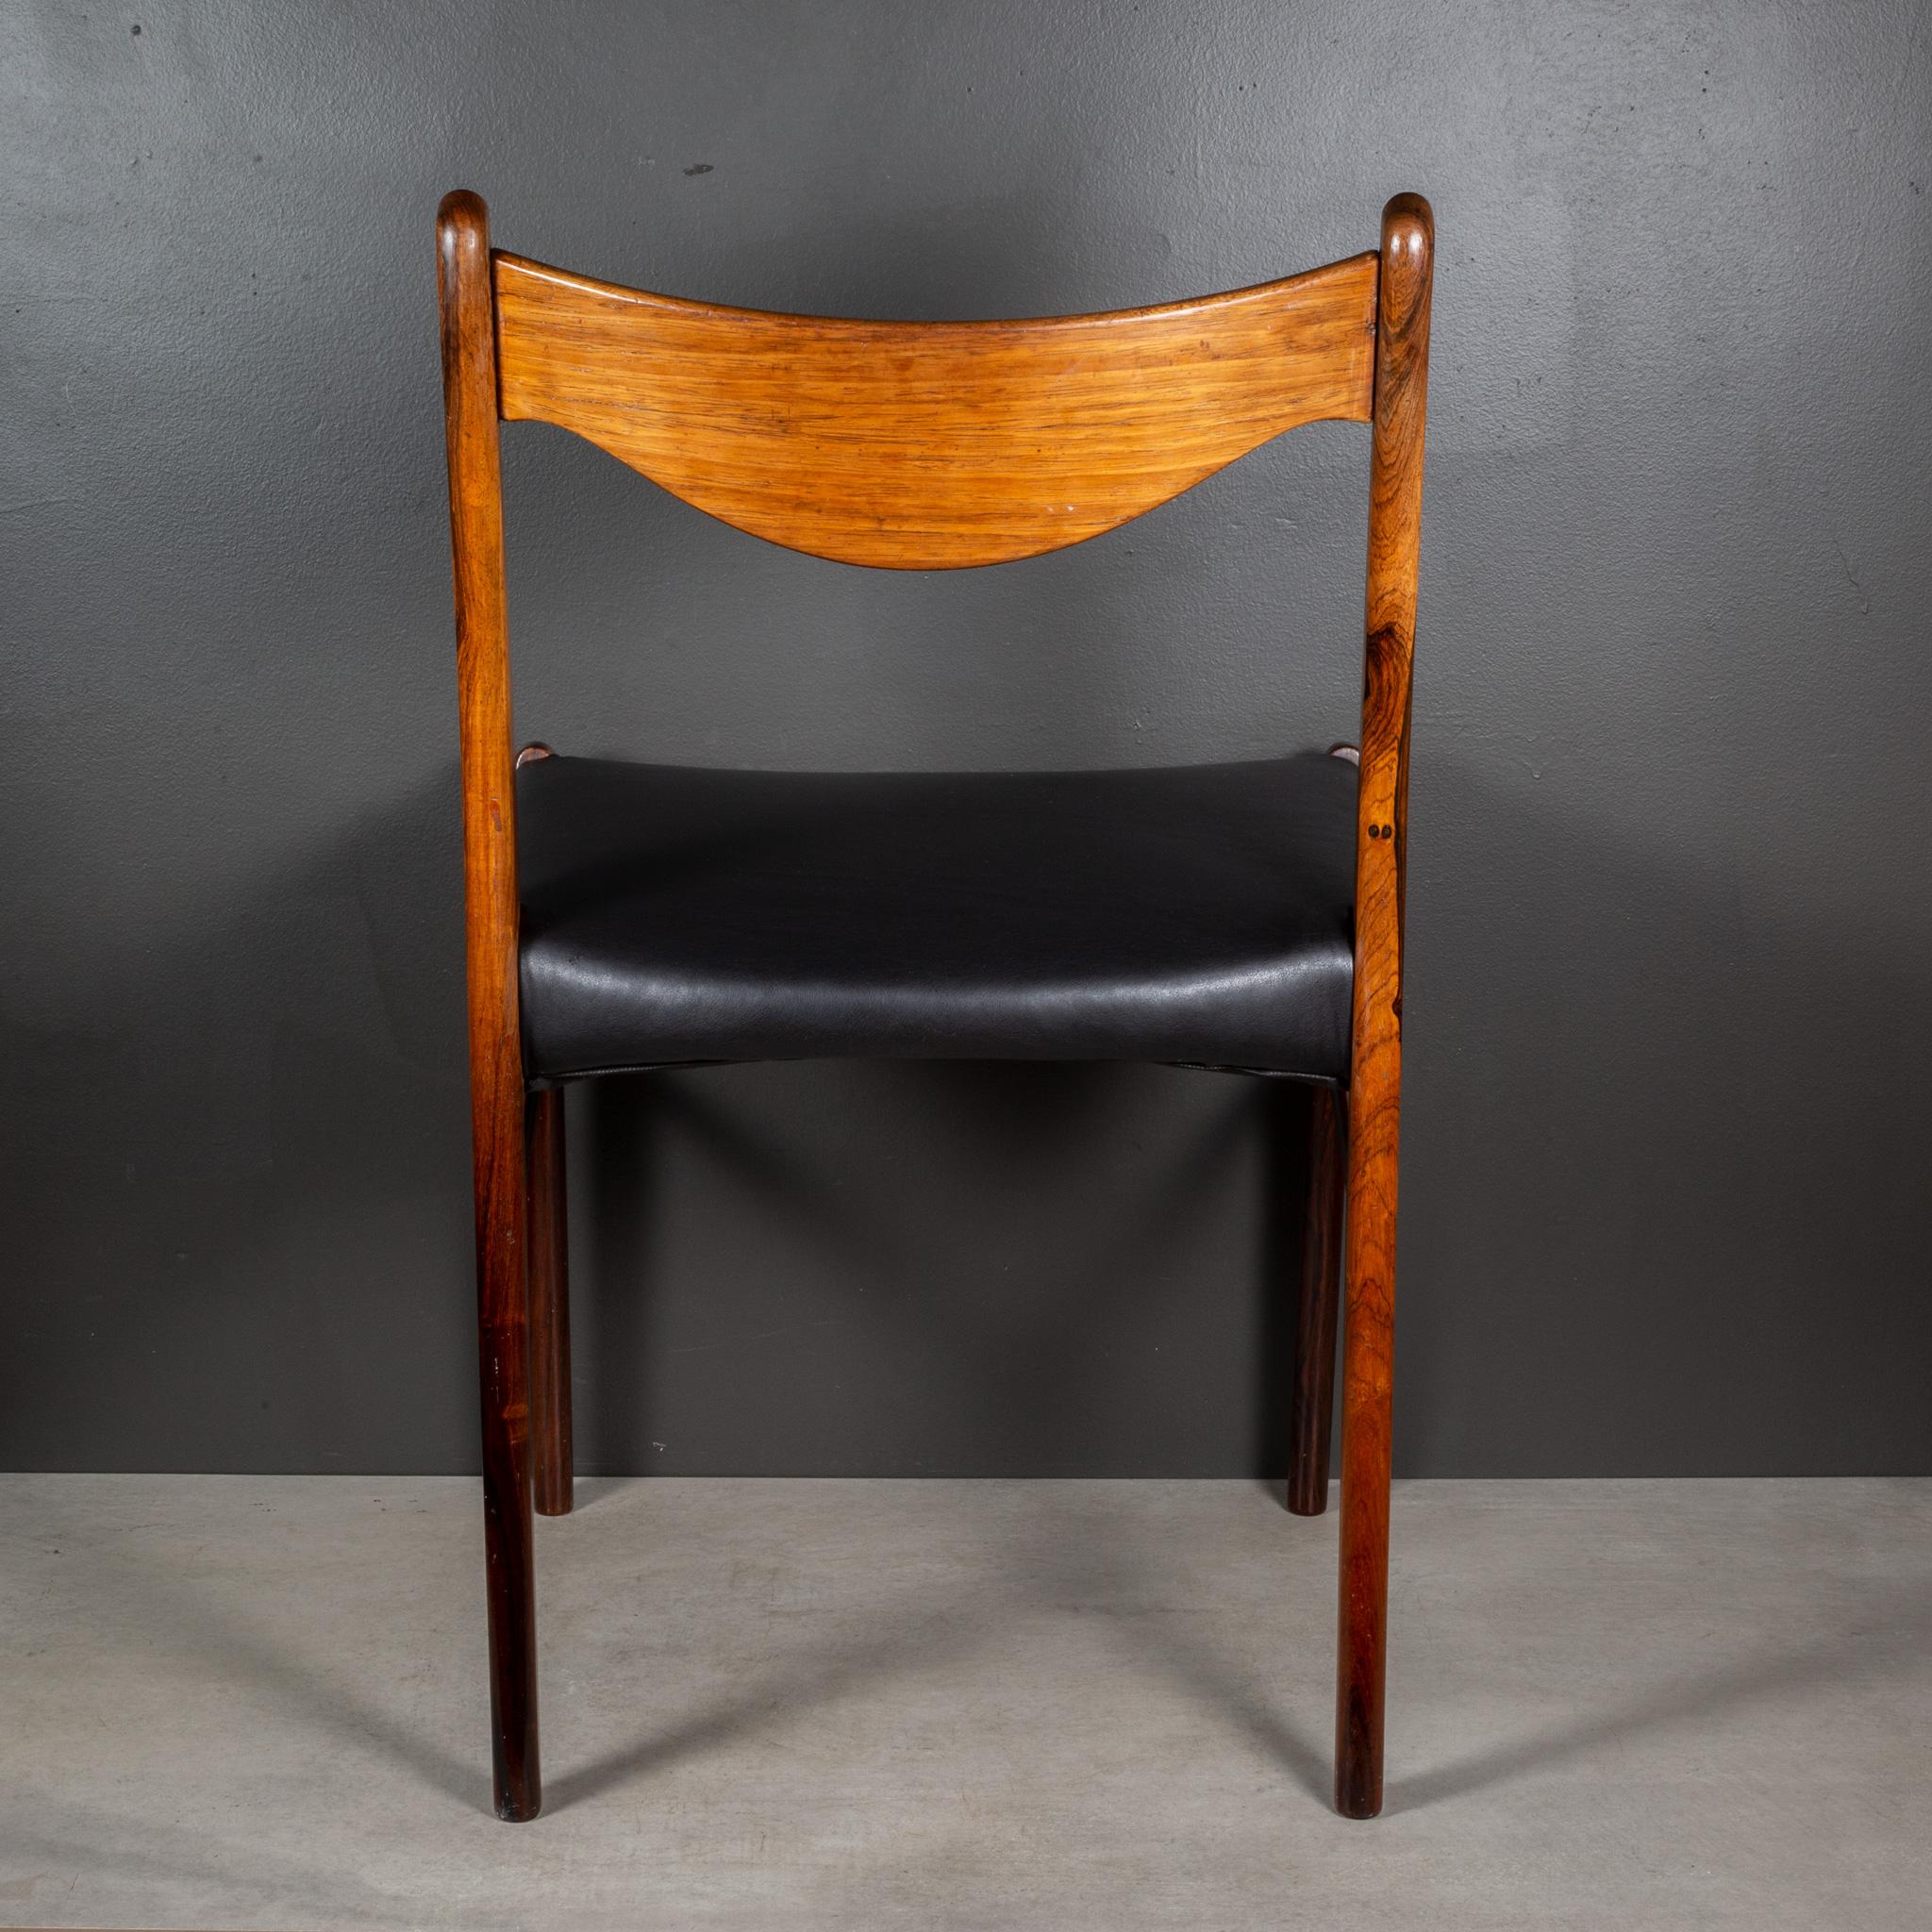 Arne Wahl Iversen Model GS61 Rosewood and Leather Dining Chairs c.1950 For Sale 7